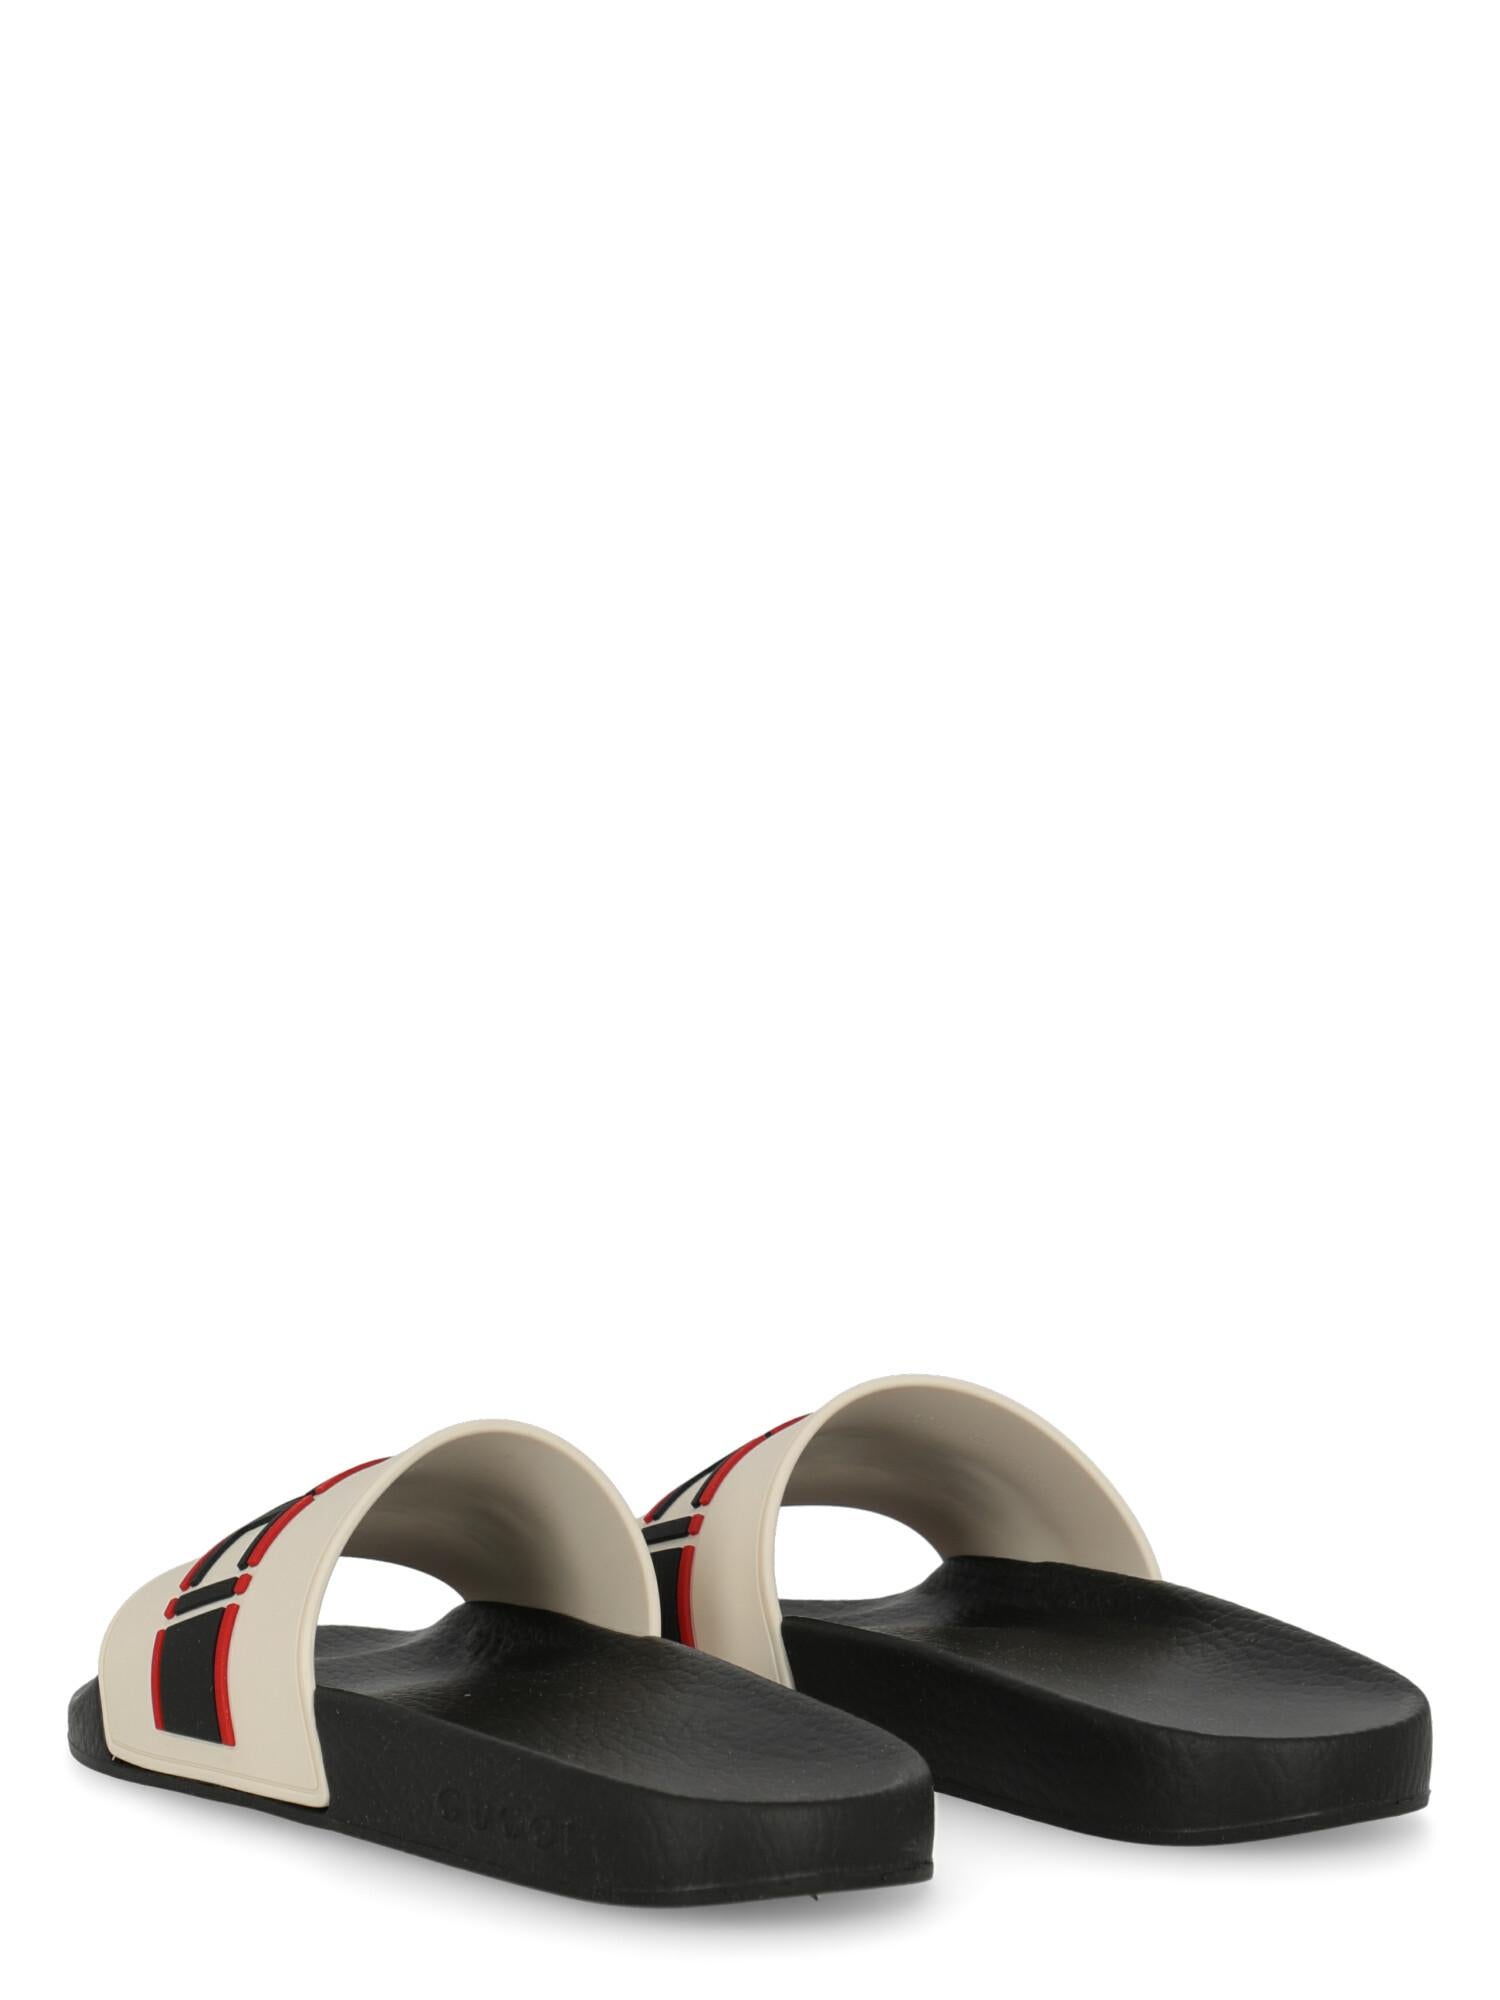 Gucci Women Slippers Black, Red, White Synthetic Fibers EU 39 In Excellent Condition For Sale In Milan, IT